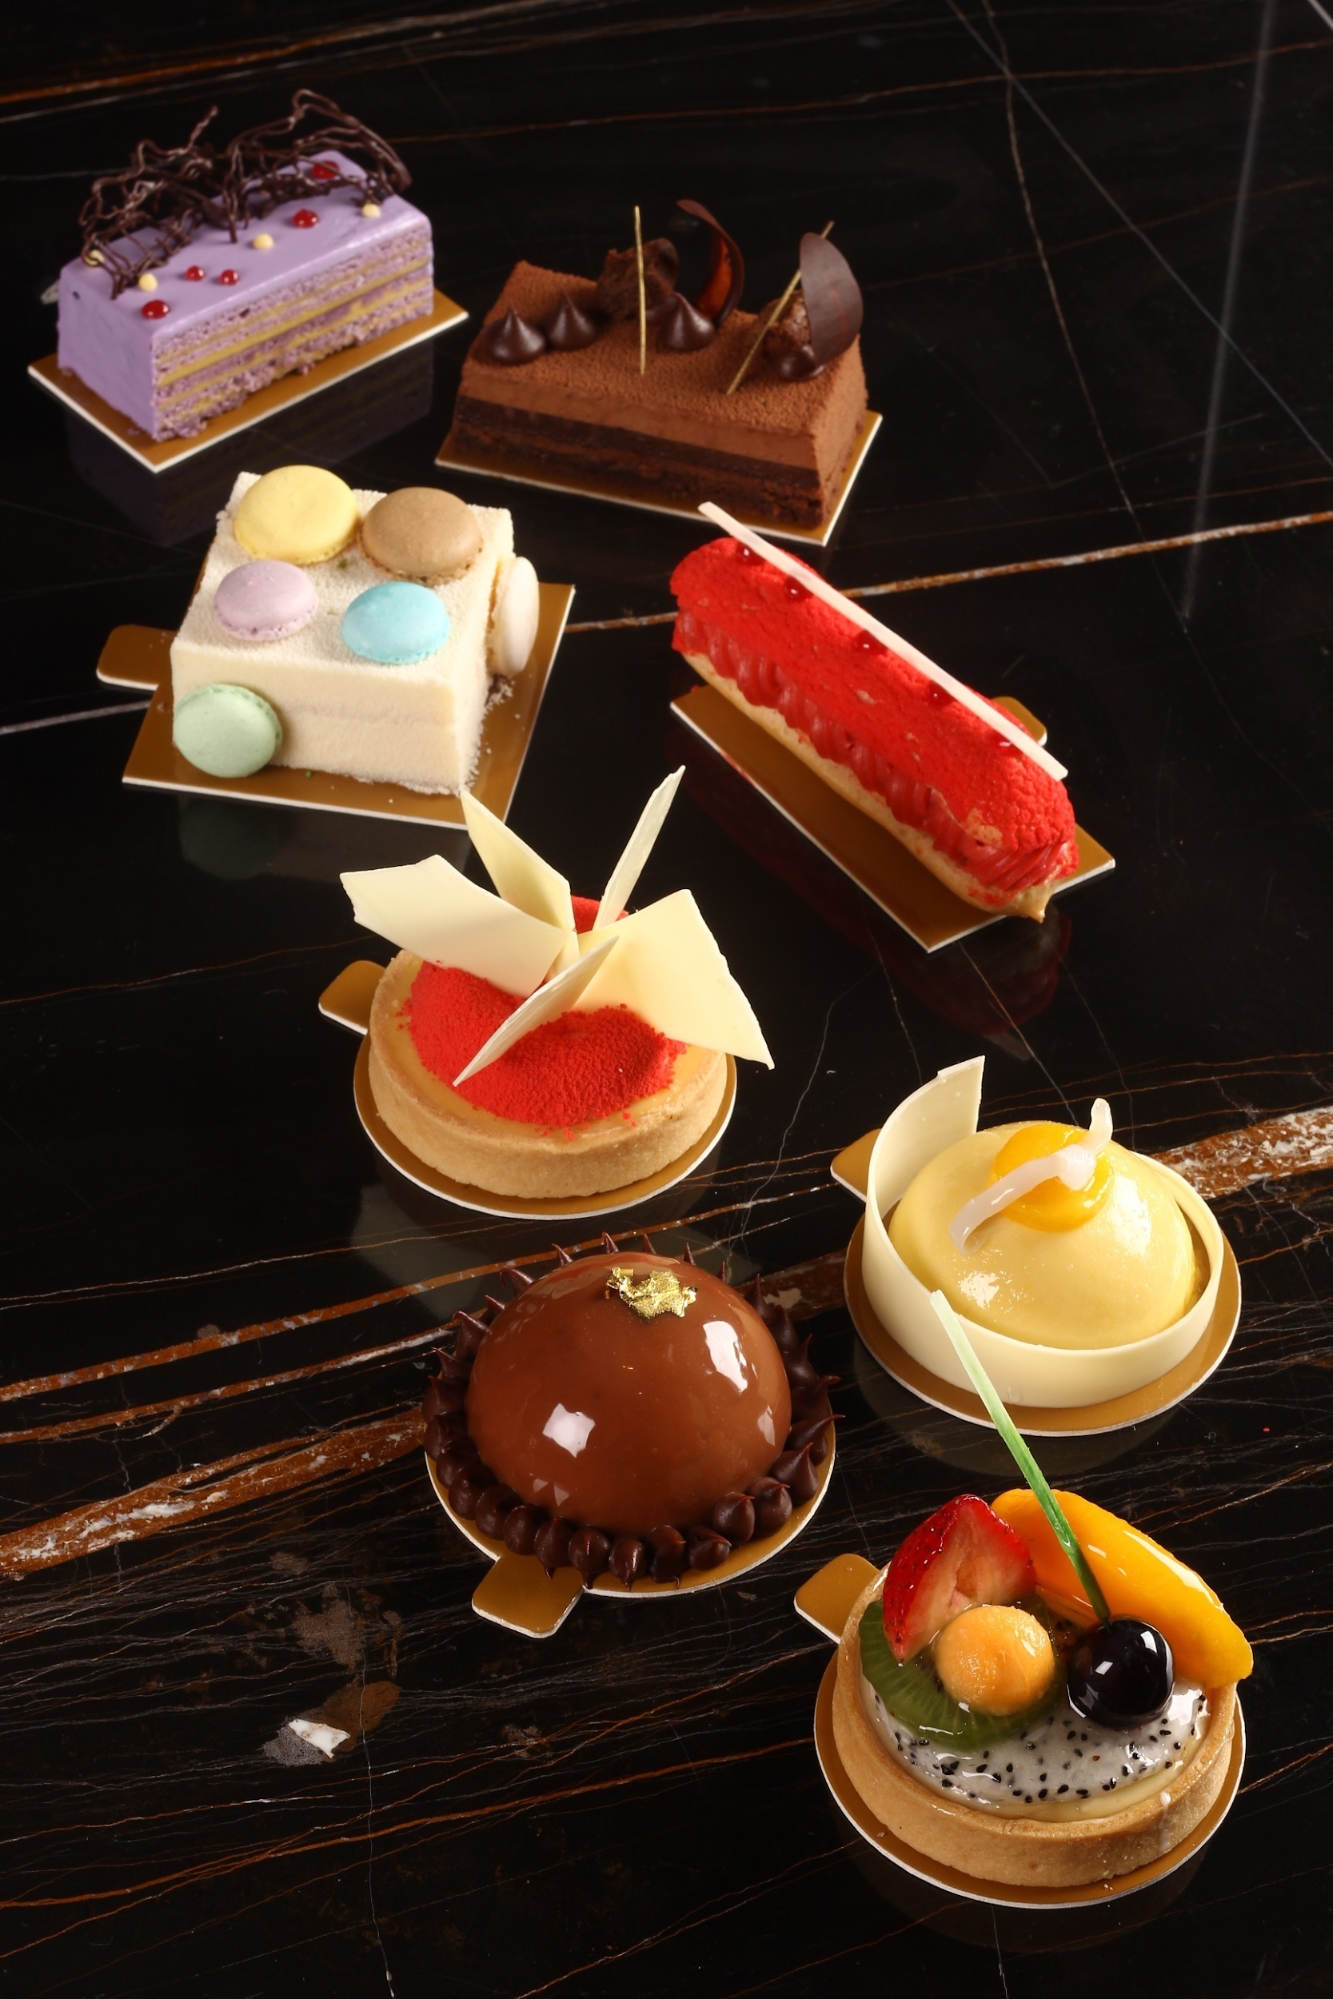 An assortment of intricately-decorated desserts from Solaire Food Court